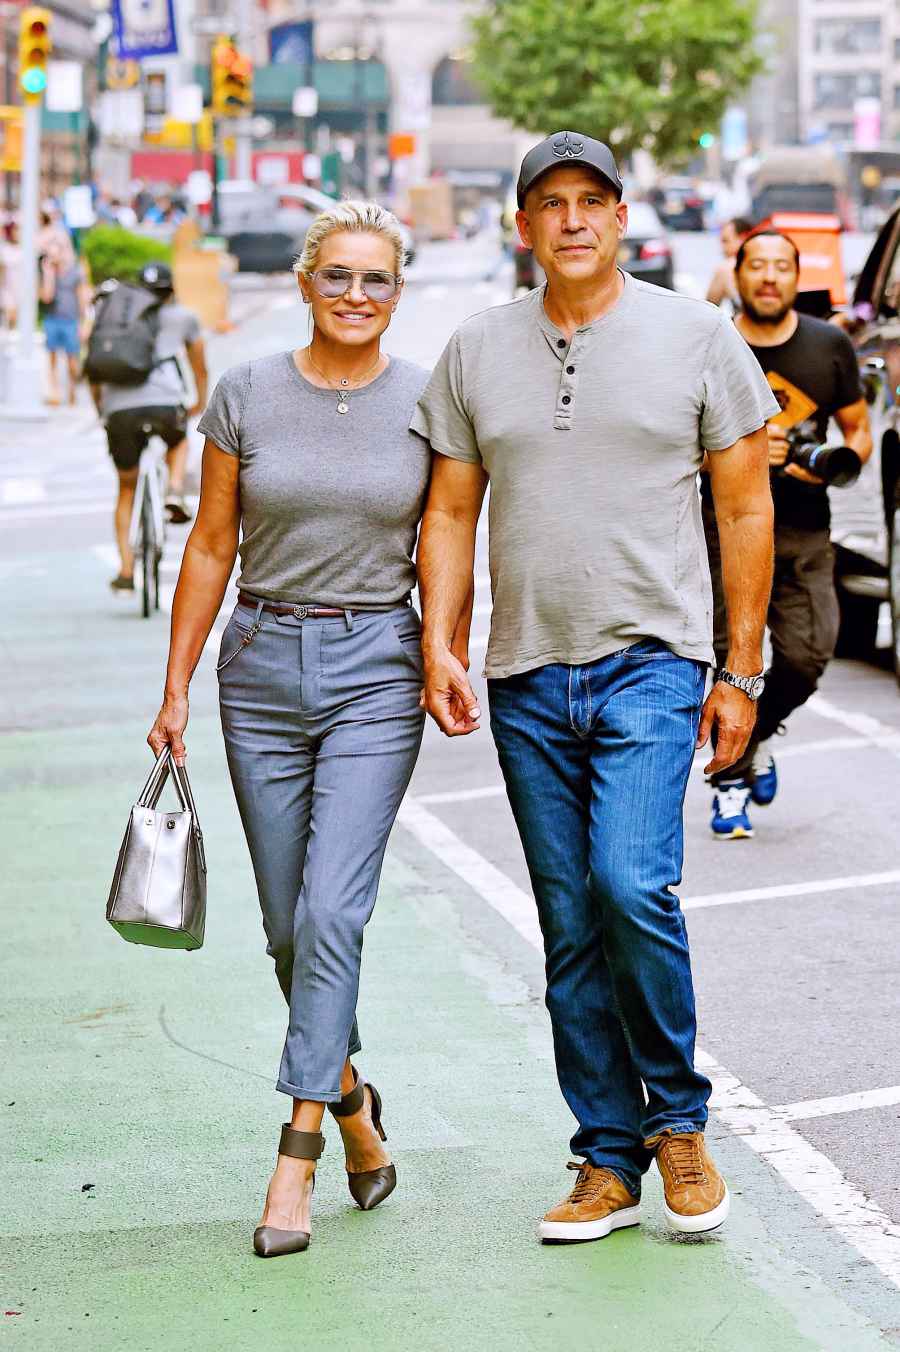 Yolanda Hadid Holds Hands With Mystery Man 1 Month After Ex David Foster’s Wedding